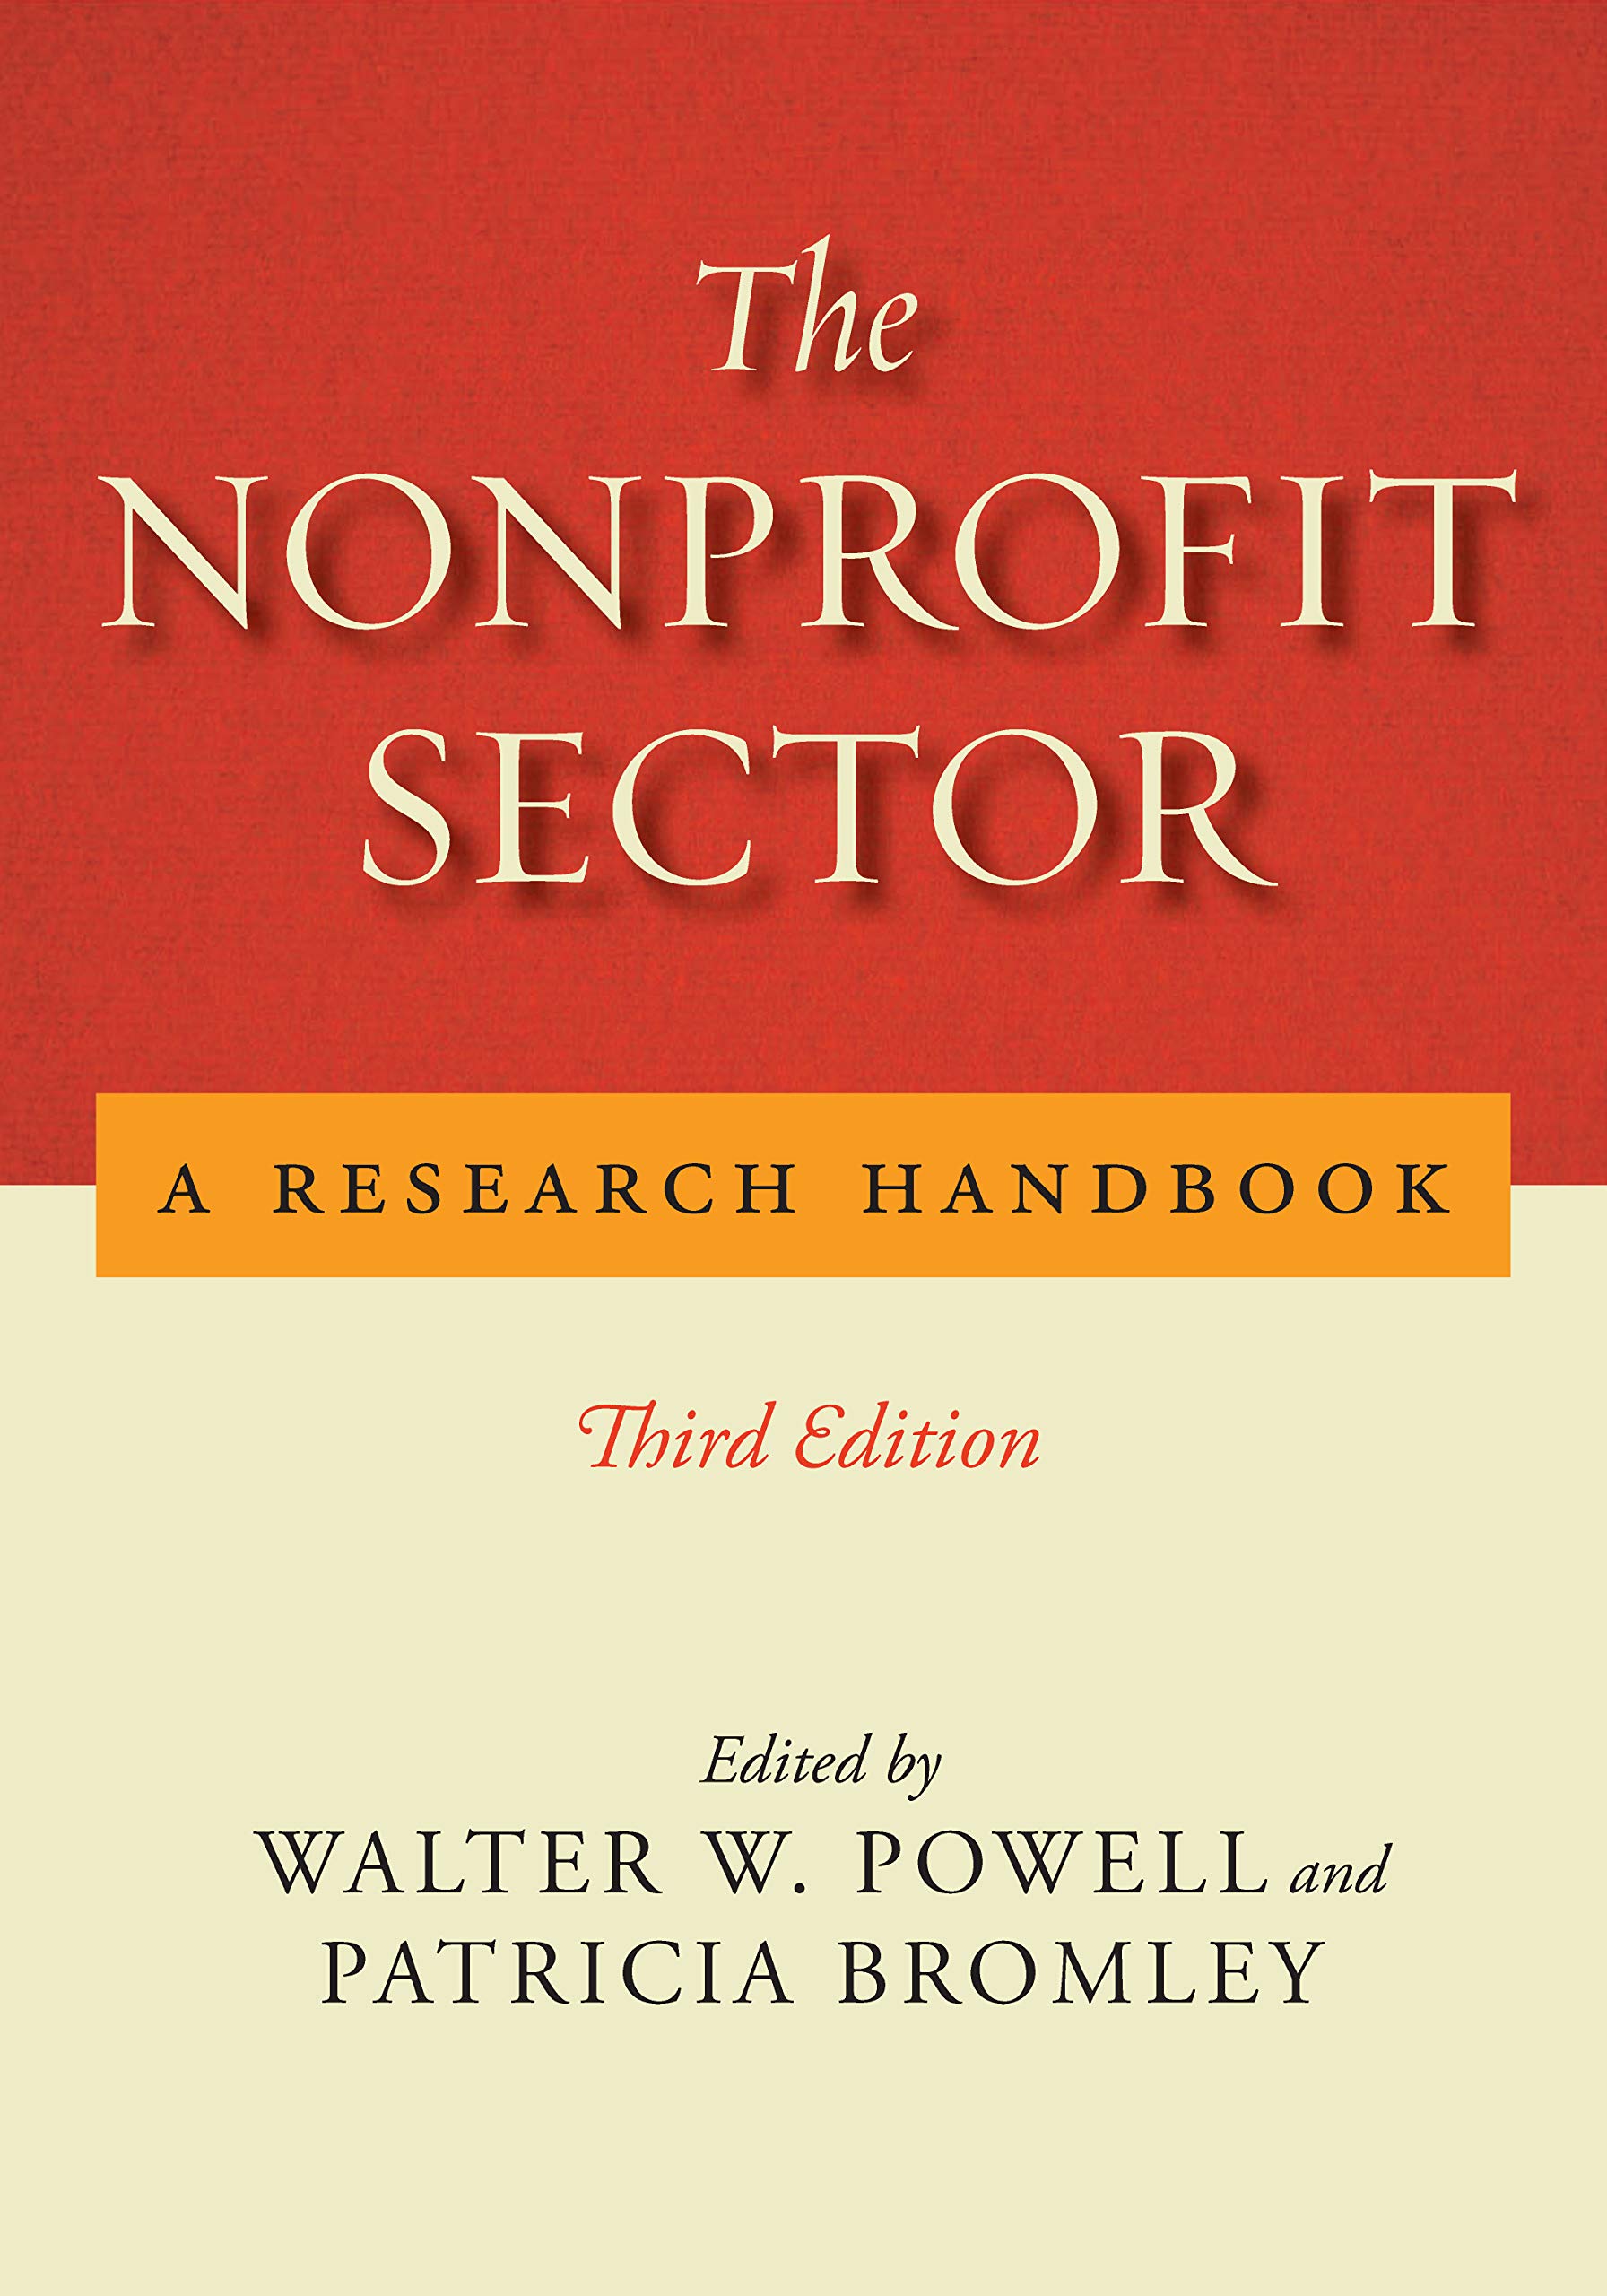 Nonprofit Sector | Walter W. Powell, Patricia Bromley